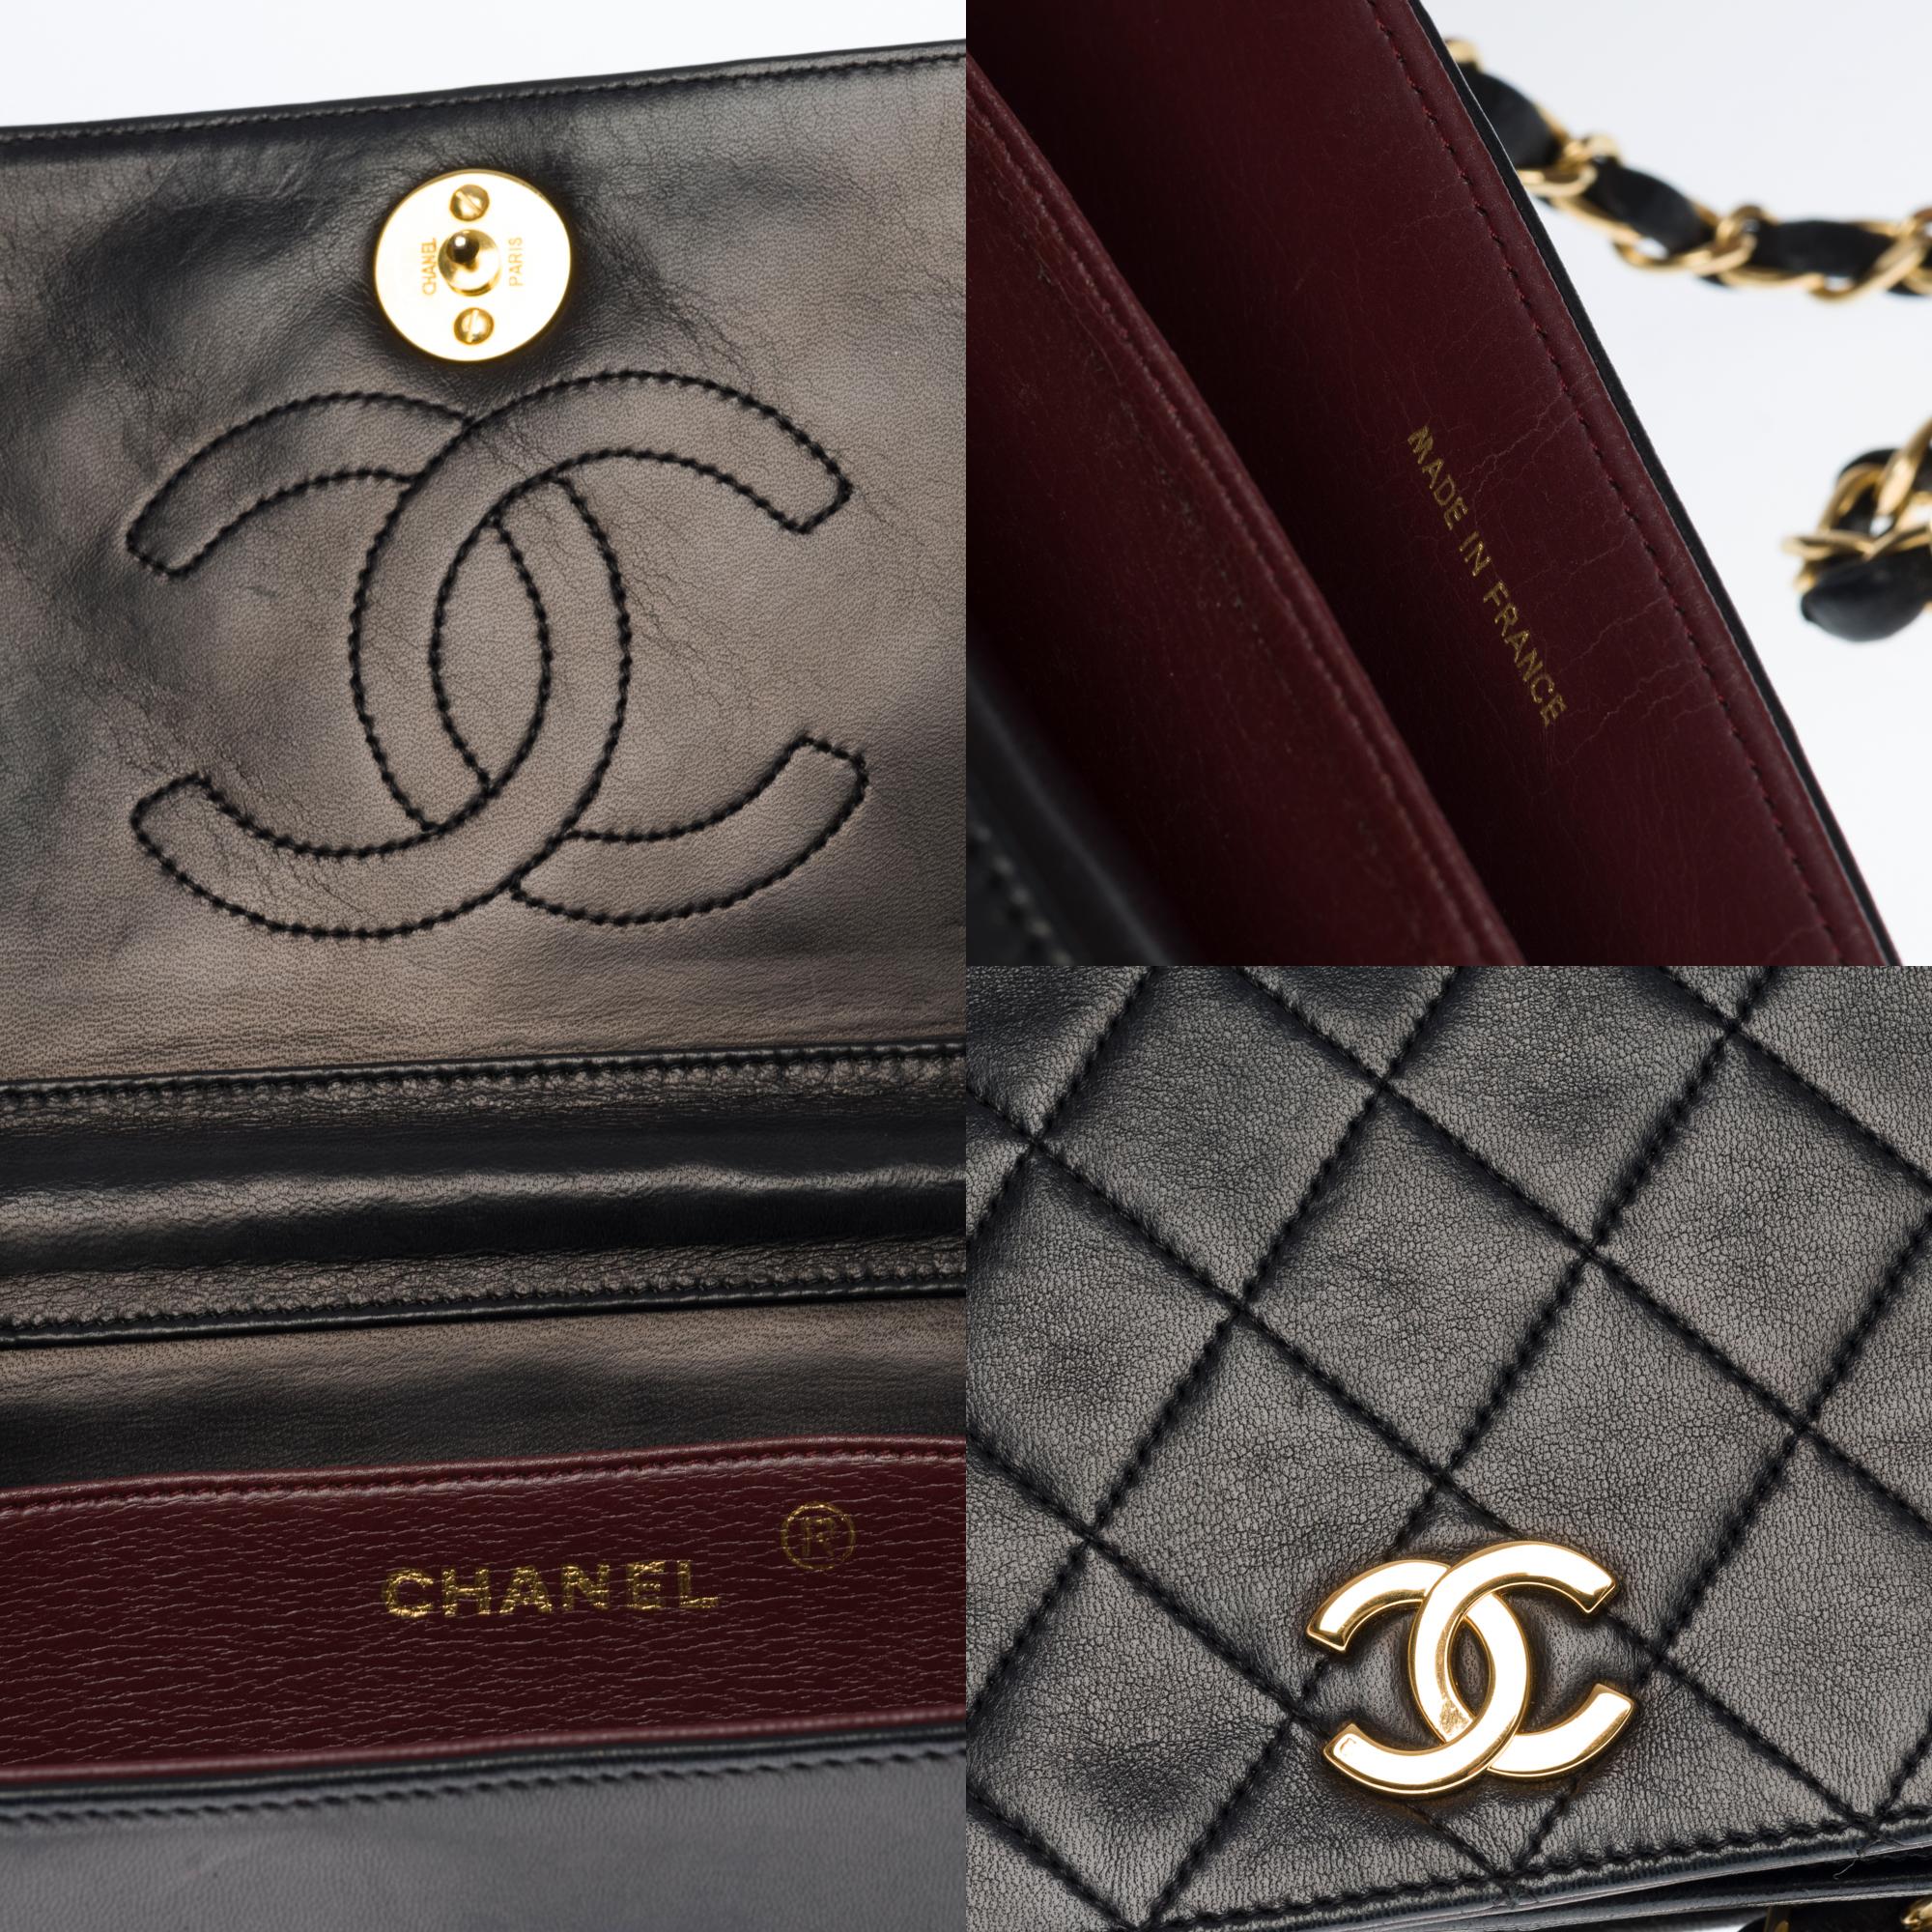 Black Chanel Classic Mini Full Flap shoulder bag in black quilted leather and GHW